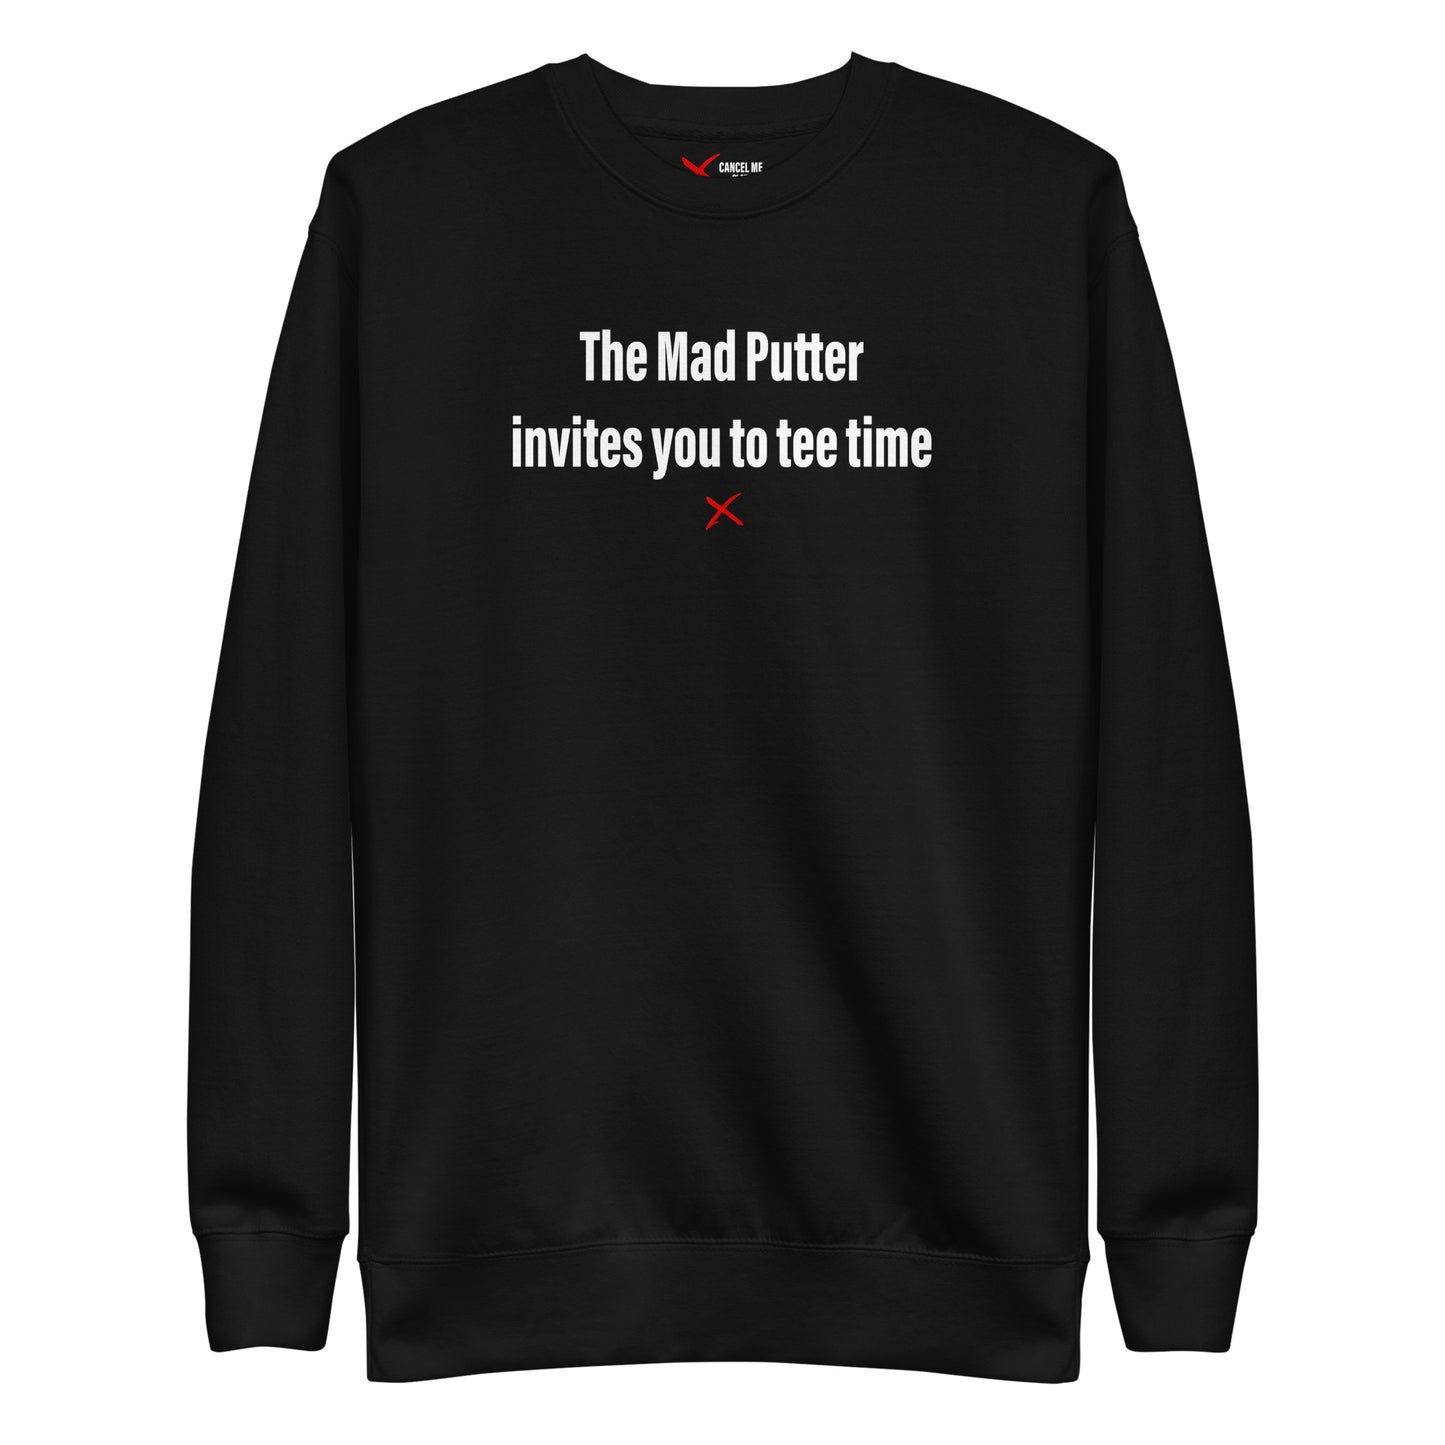 The Mad Putter invites you to tee time - Sweatshirt